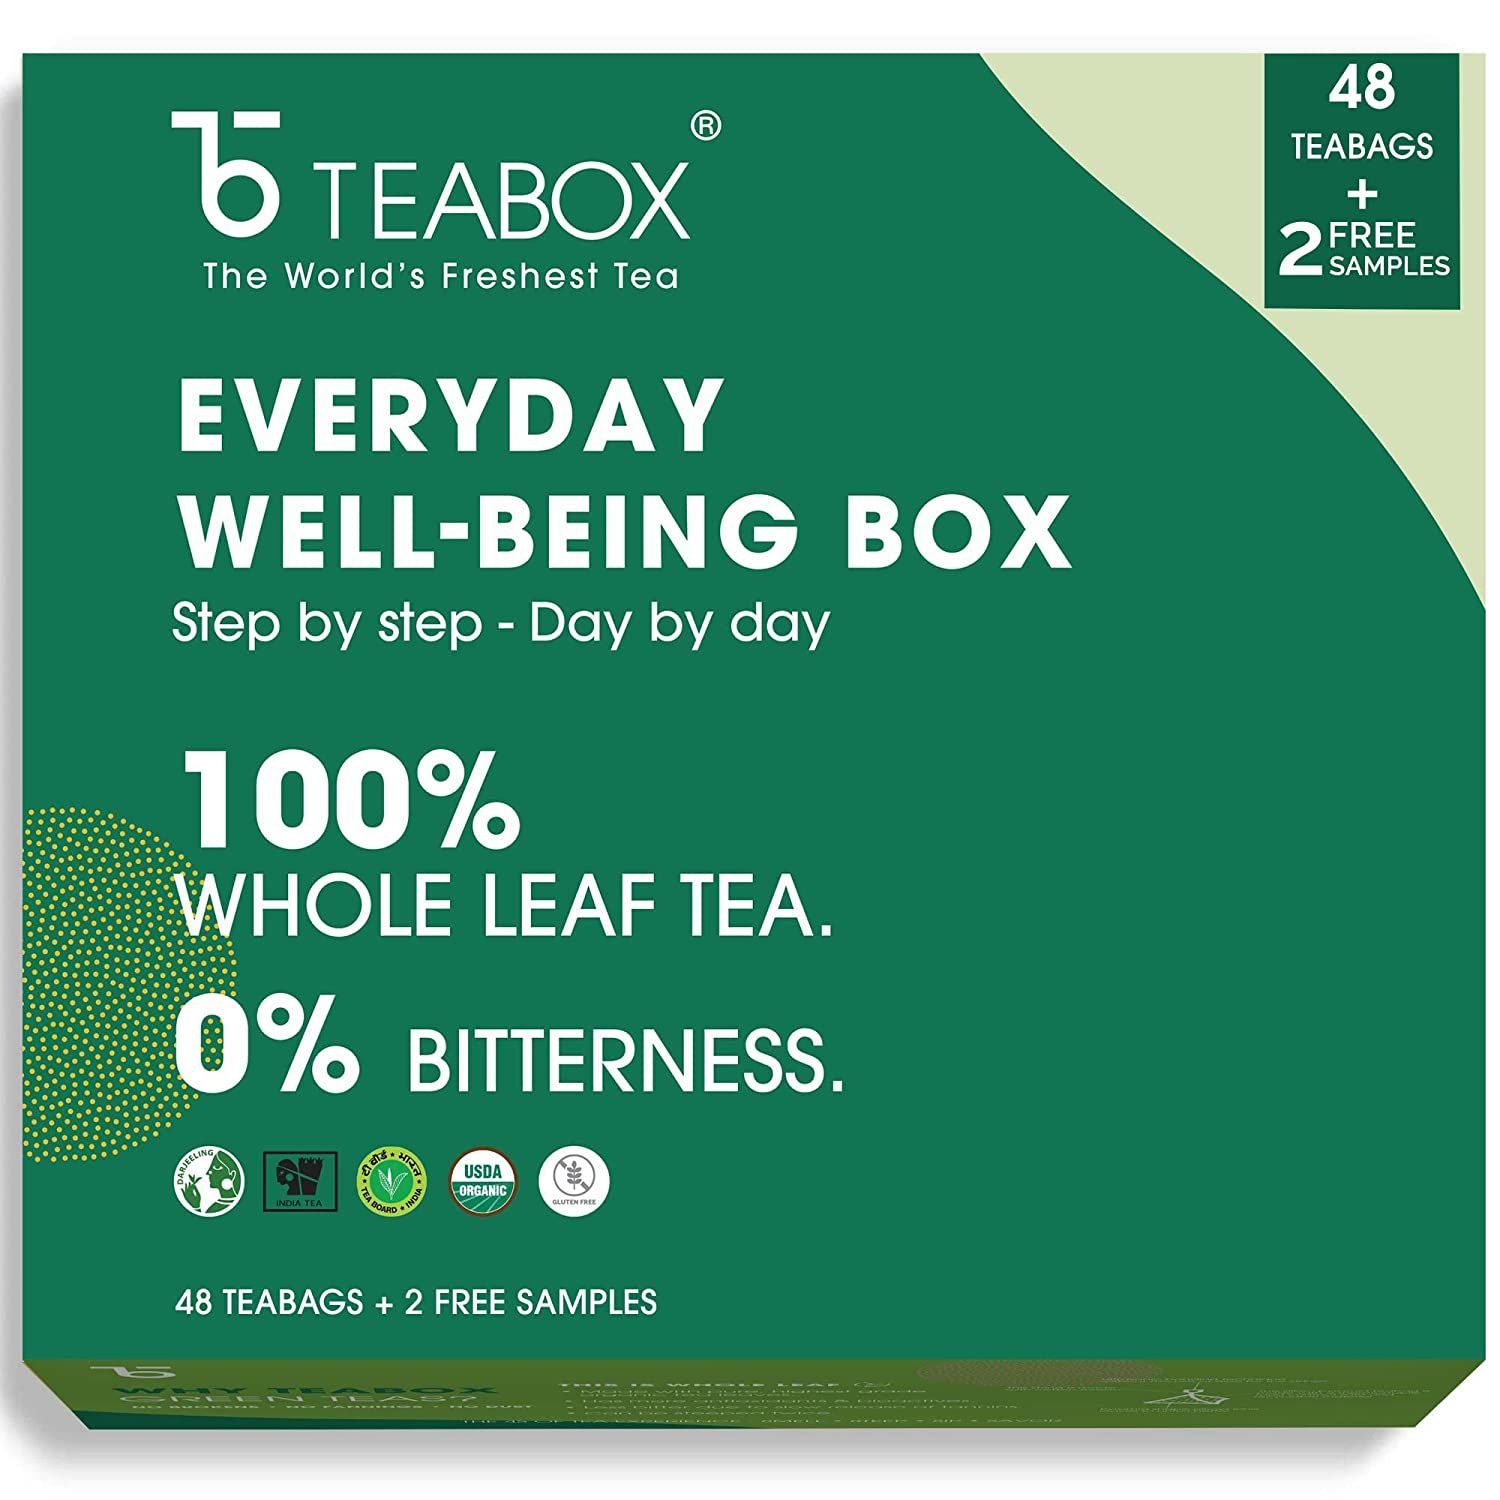 Teabox Everyday Well-Being Whole Leaf Tea Image